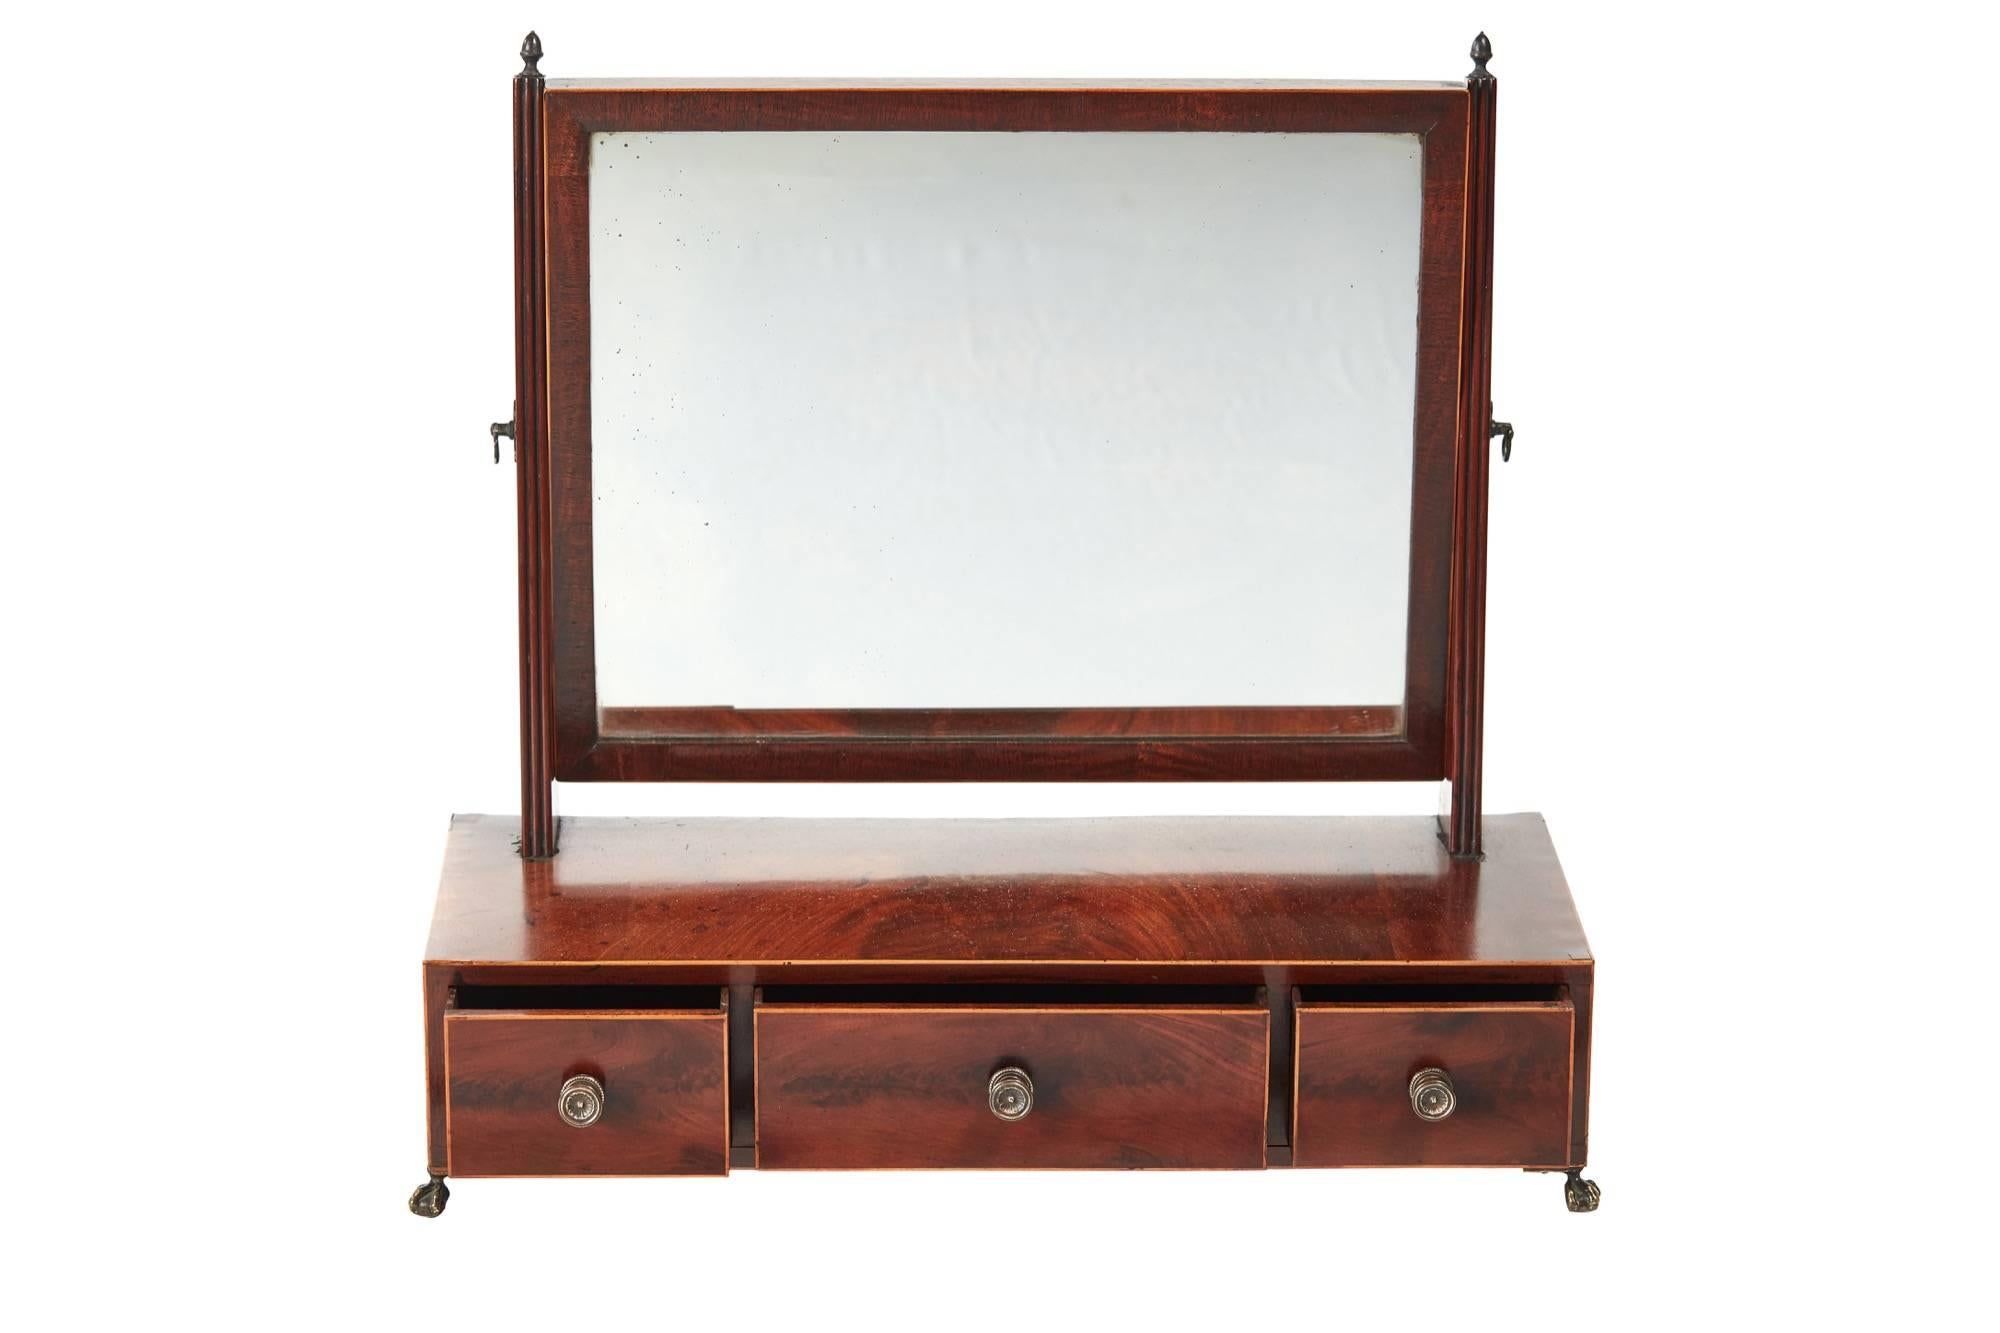 Georgian mahogany dressing table mirror, with the original mirror plate, three drawers with satinwood stringing original brass handles, standing on brass claw and ball feet
Lovely color and condition
Measure: 24